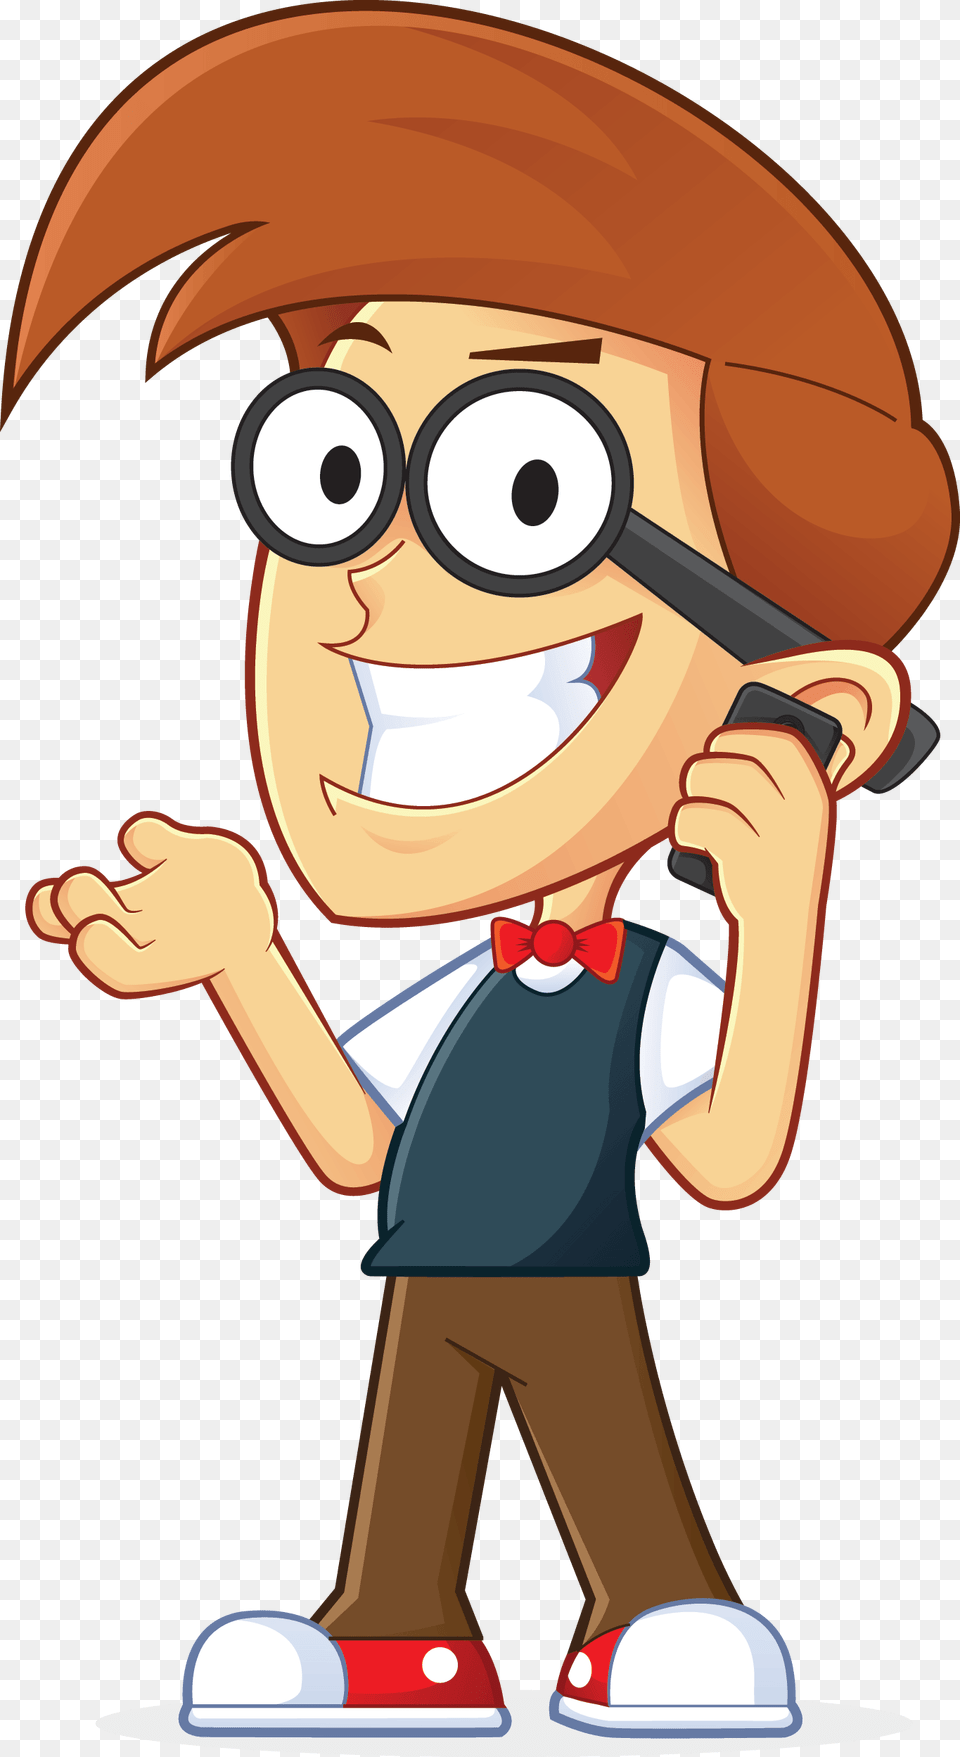 Nerd Geek Talking On Cell Phone People High Resolution Clip, Cartoon, Book, Comics, Publication Free Transparent Png